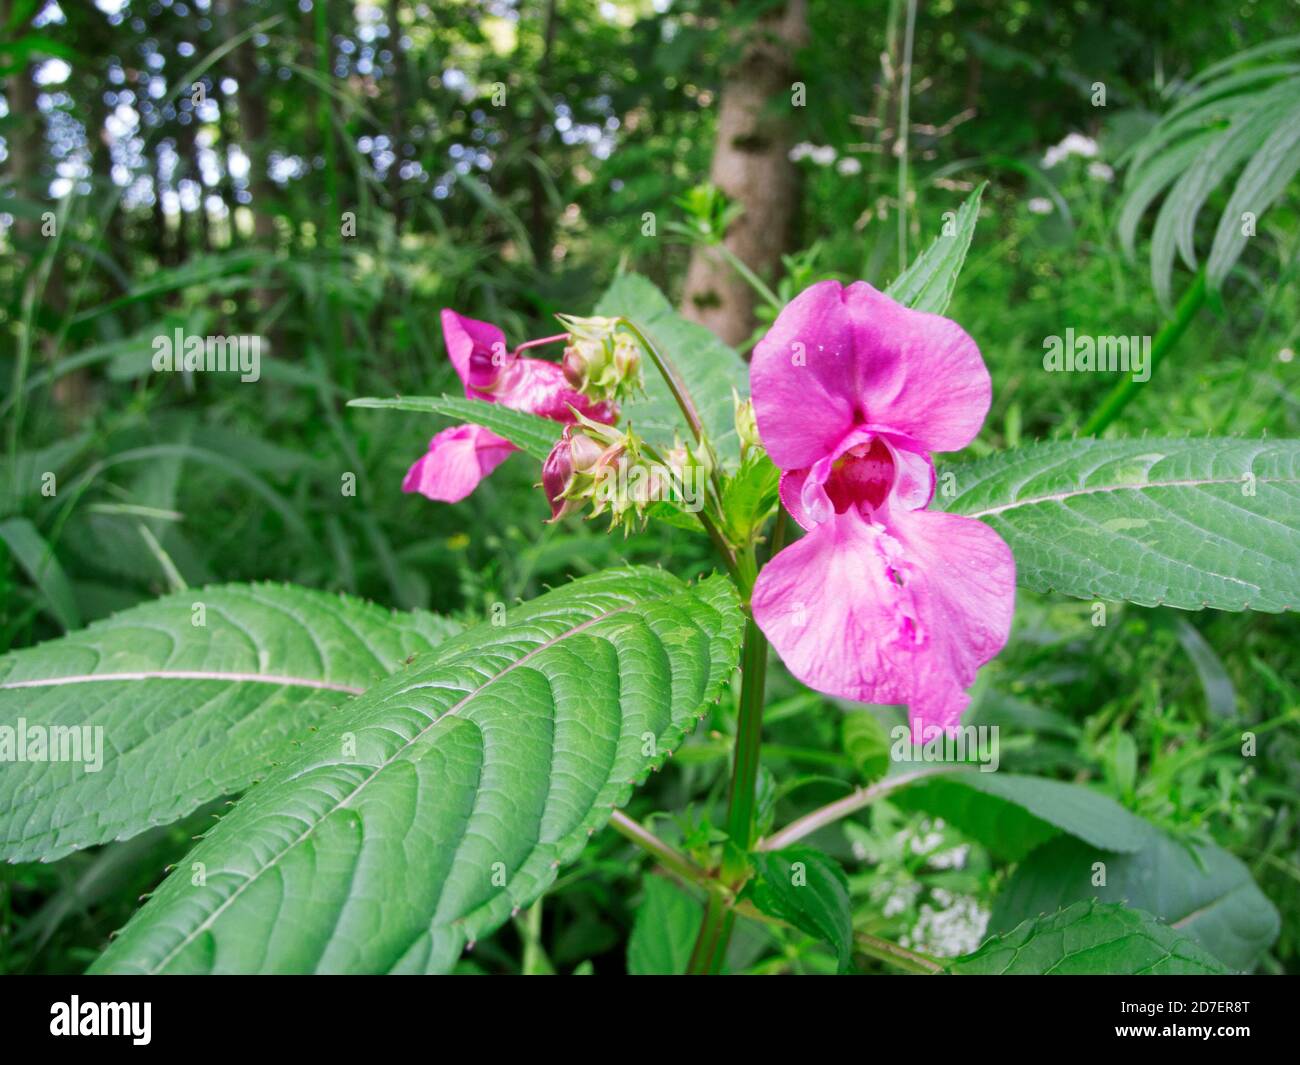 Wide-angle close-up of a fully open flower of the glandular balsam (lat: Impatiens glandulifera) also called Indian balsam, in the foreground and the Stock Photo